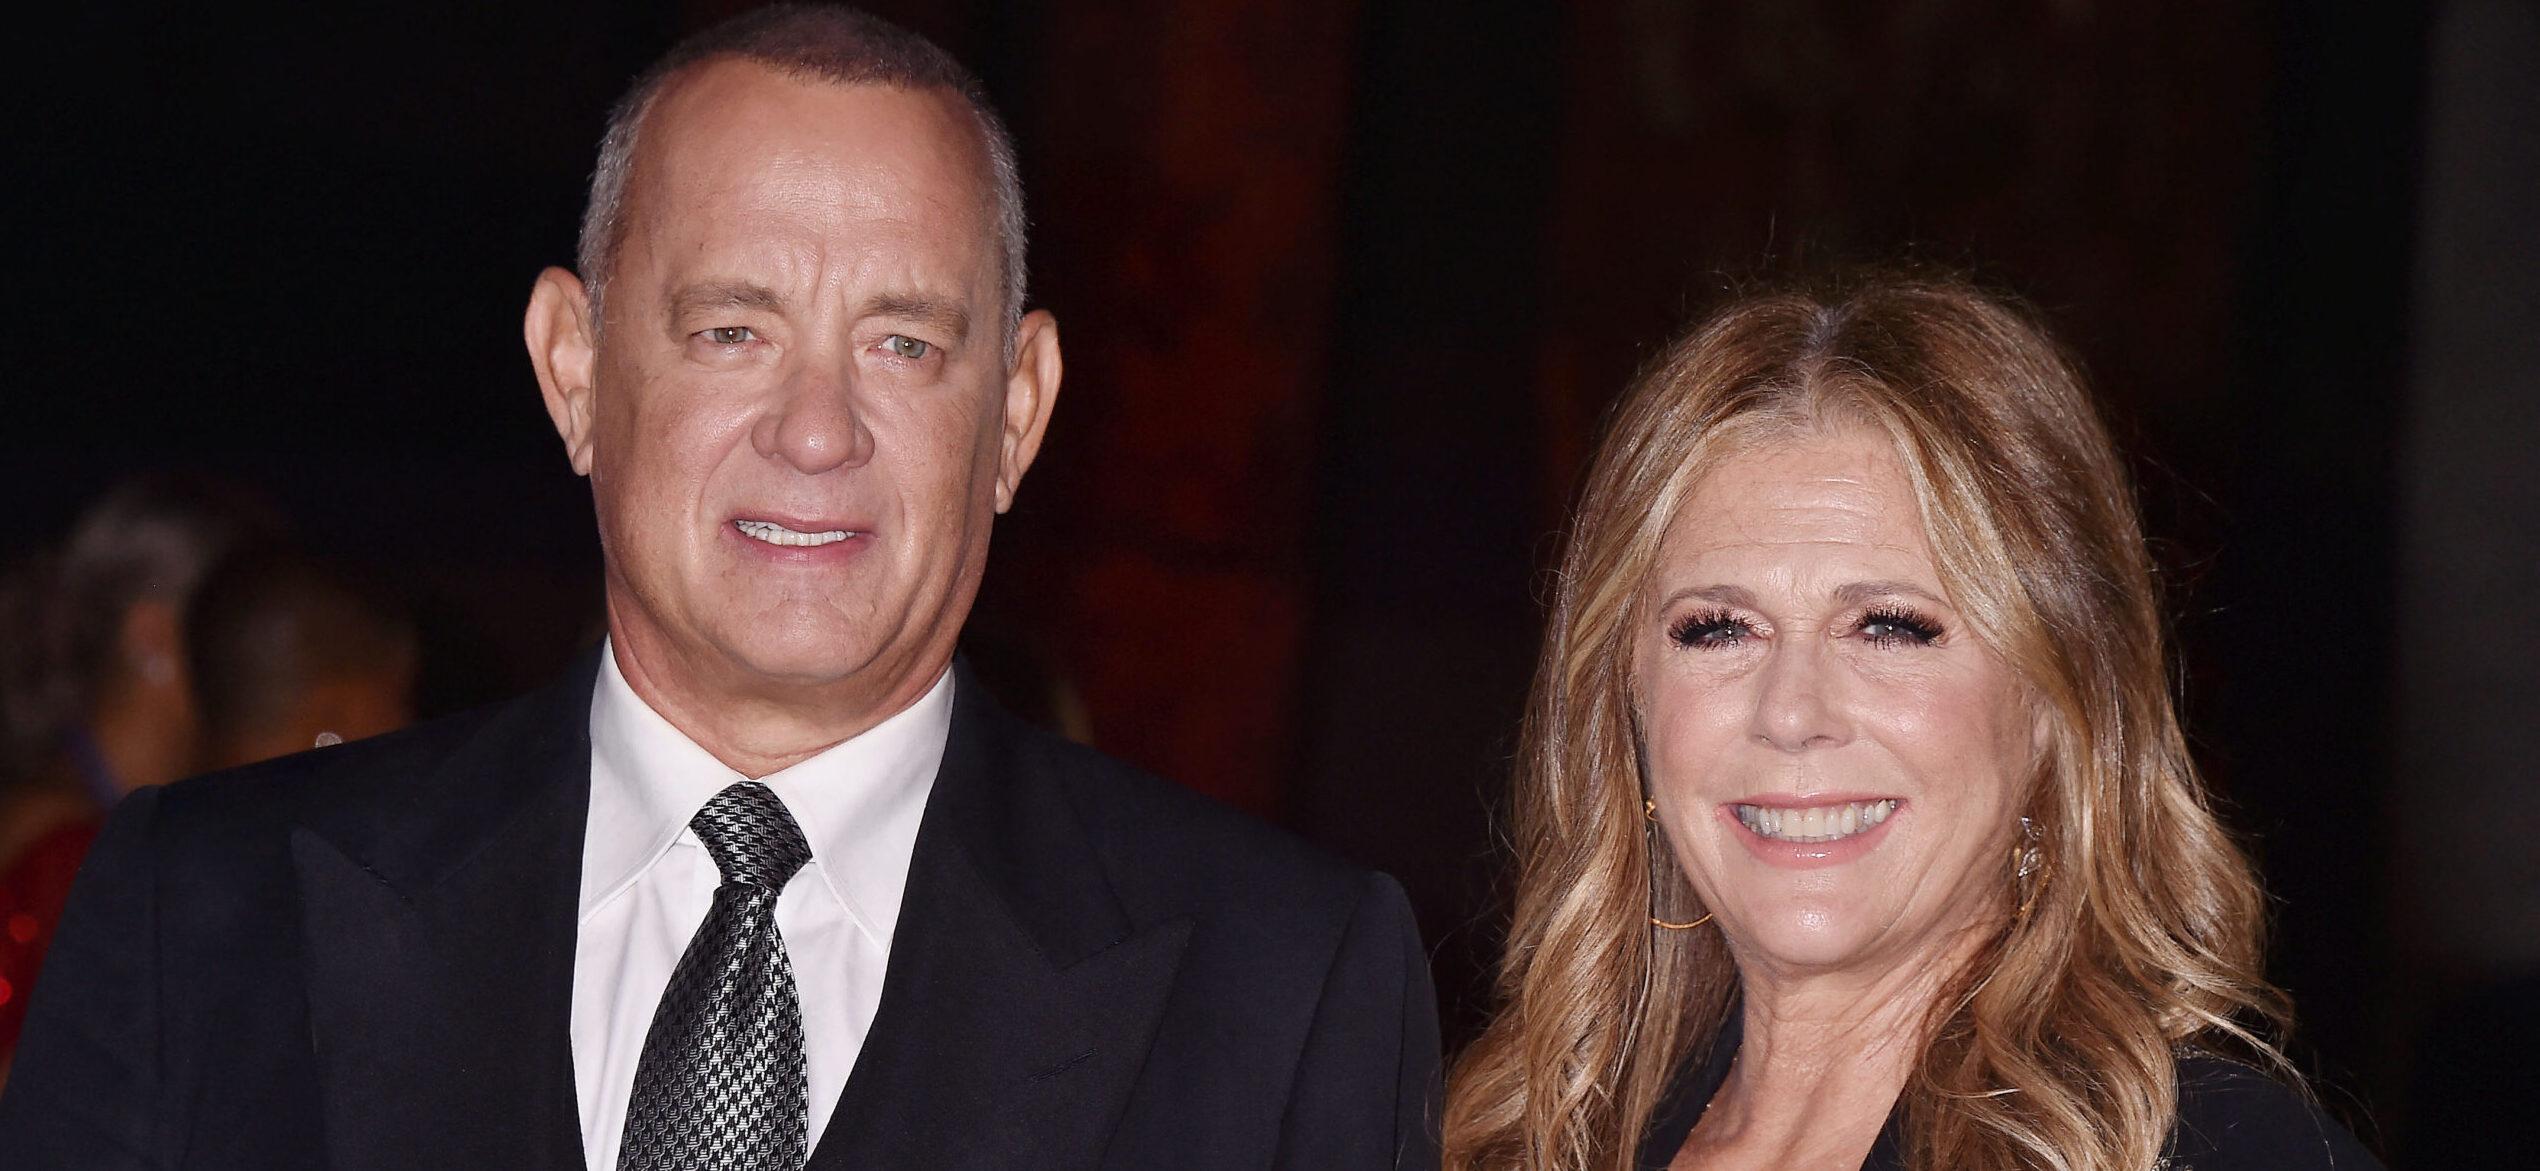 Tom Hanks and Rita Wilson at The Academy Museum Of Motion Pictures Opening Gala - Arrivals